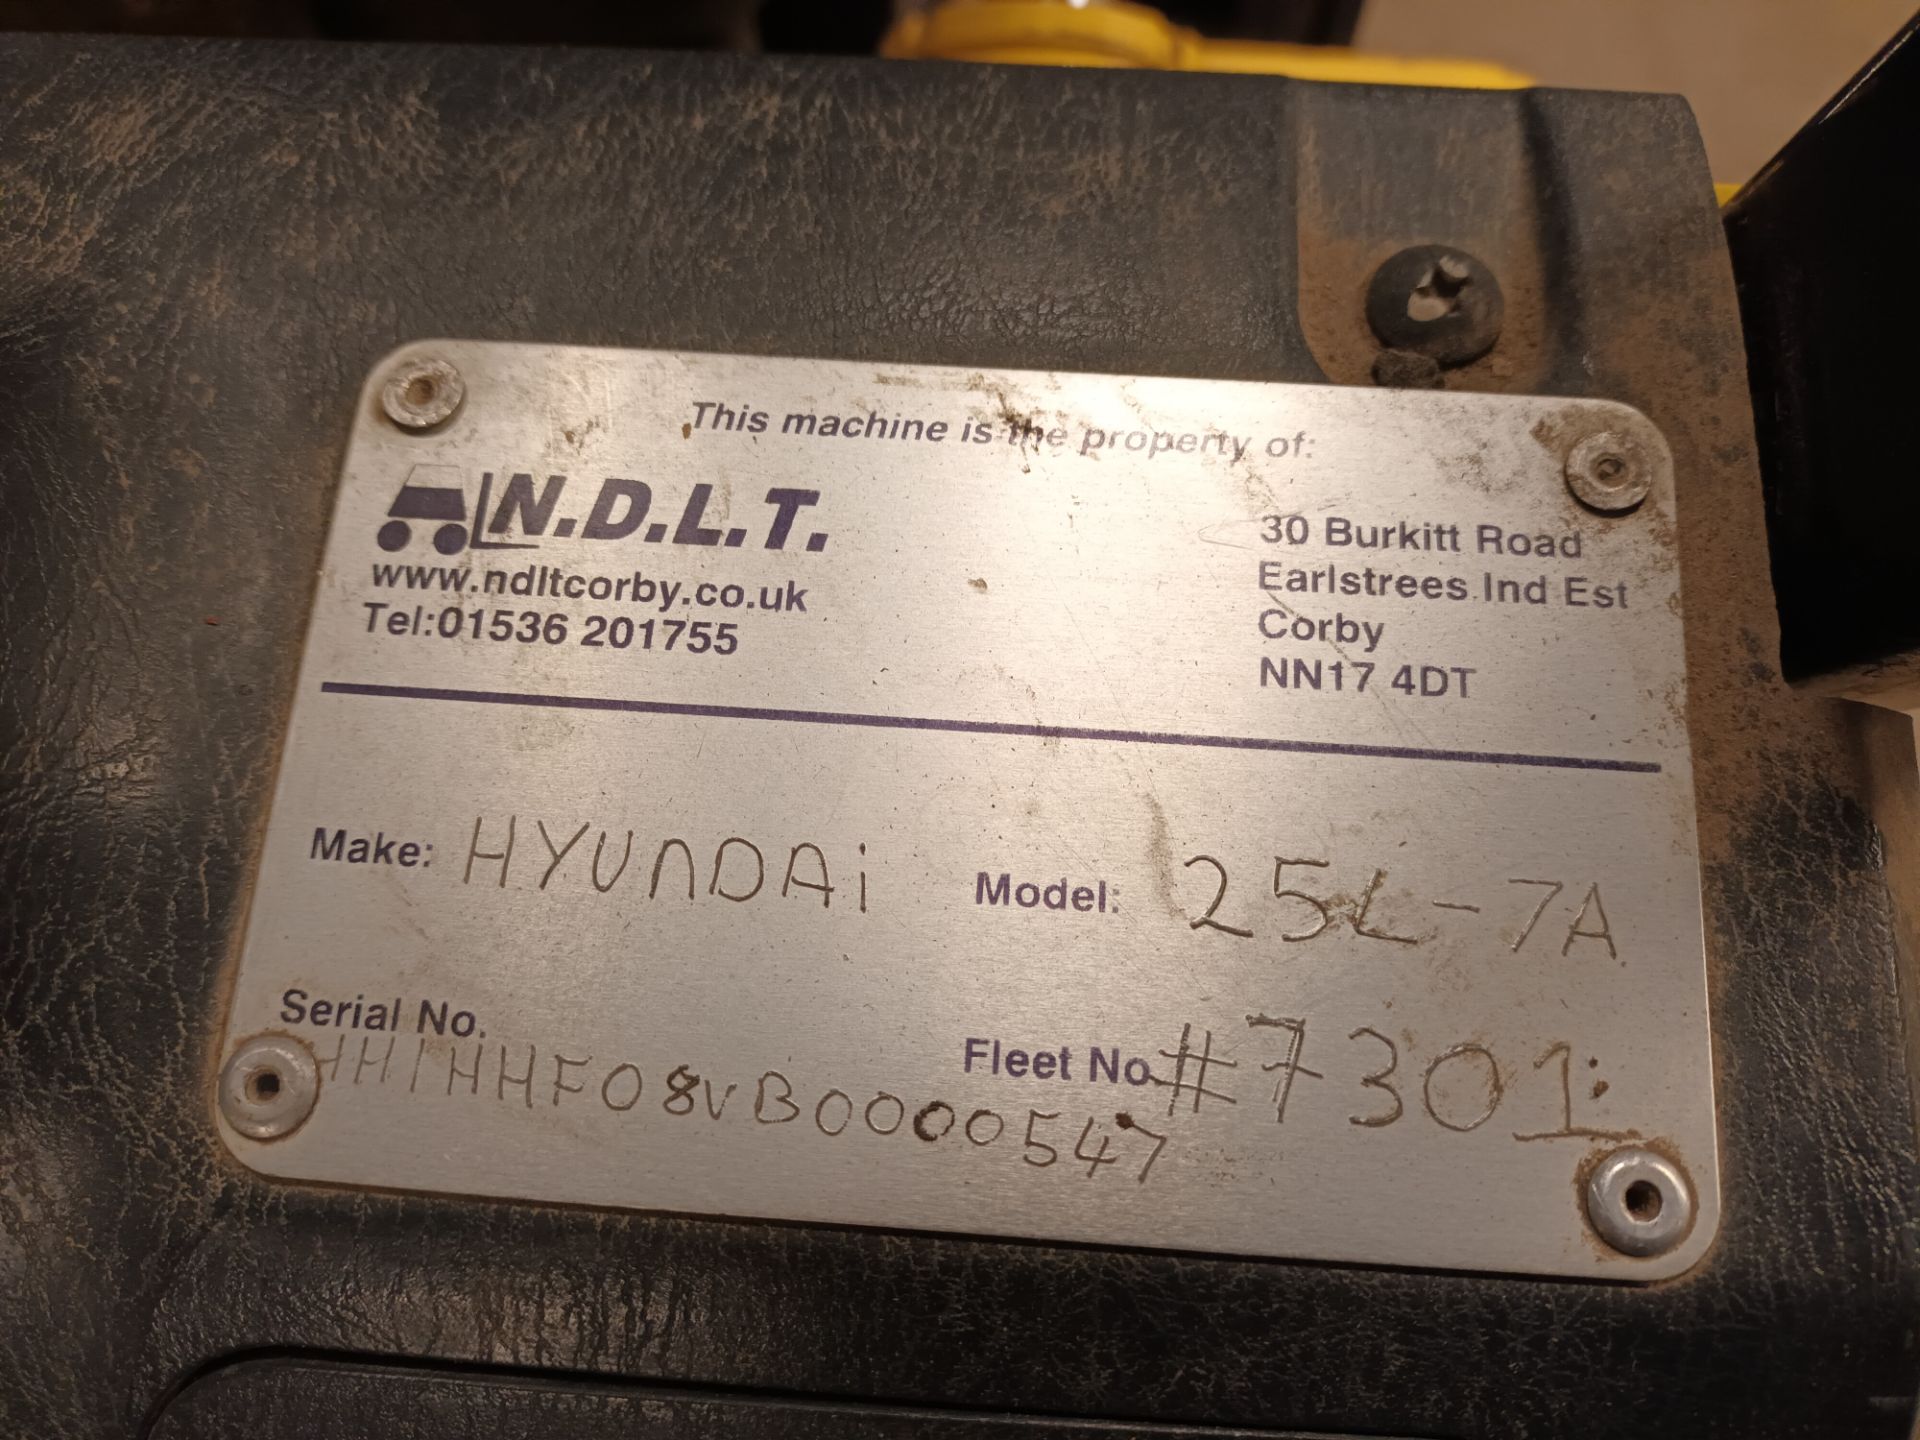 Hyundai 25L-7A LPG forklift truck (2011) with 2,430 hours *DELAYED COLLECTION* - Image 6 of 9